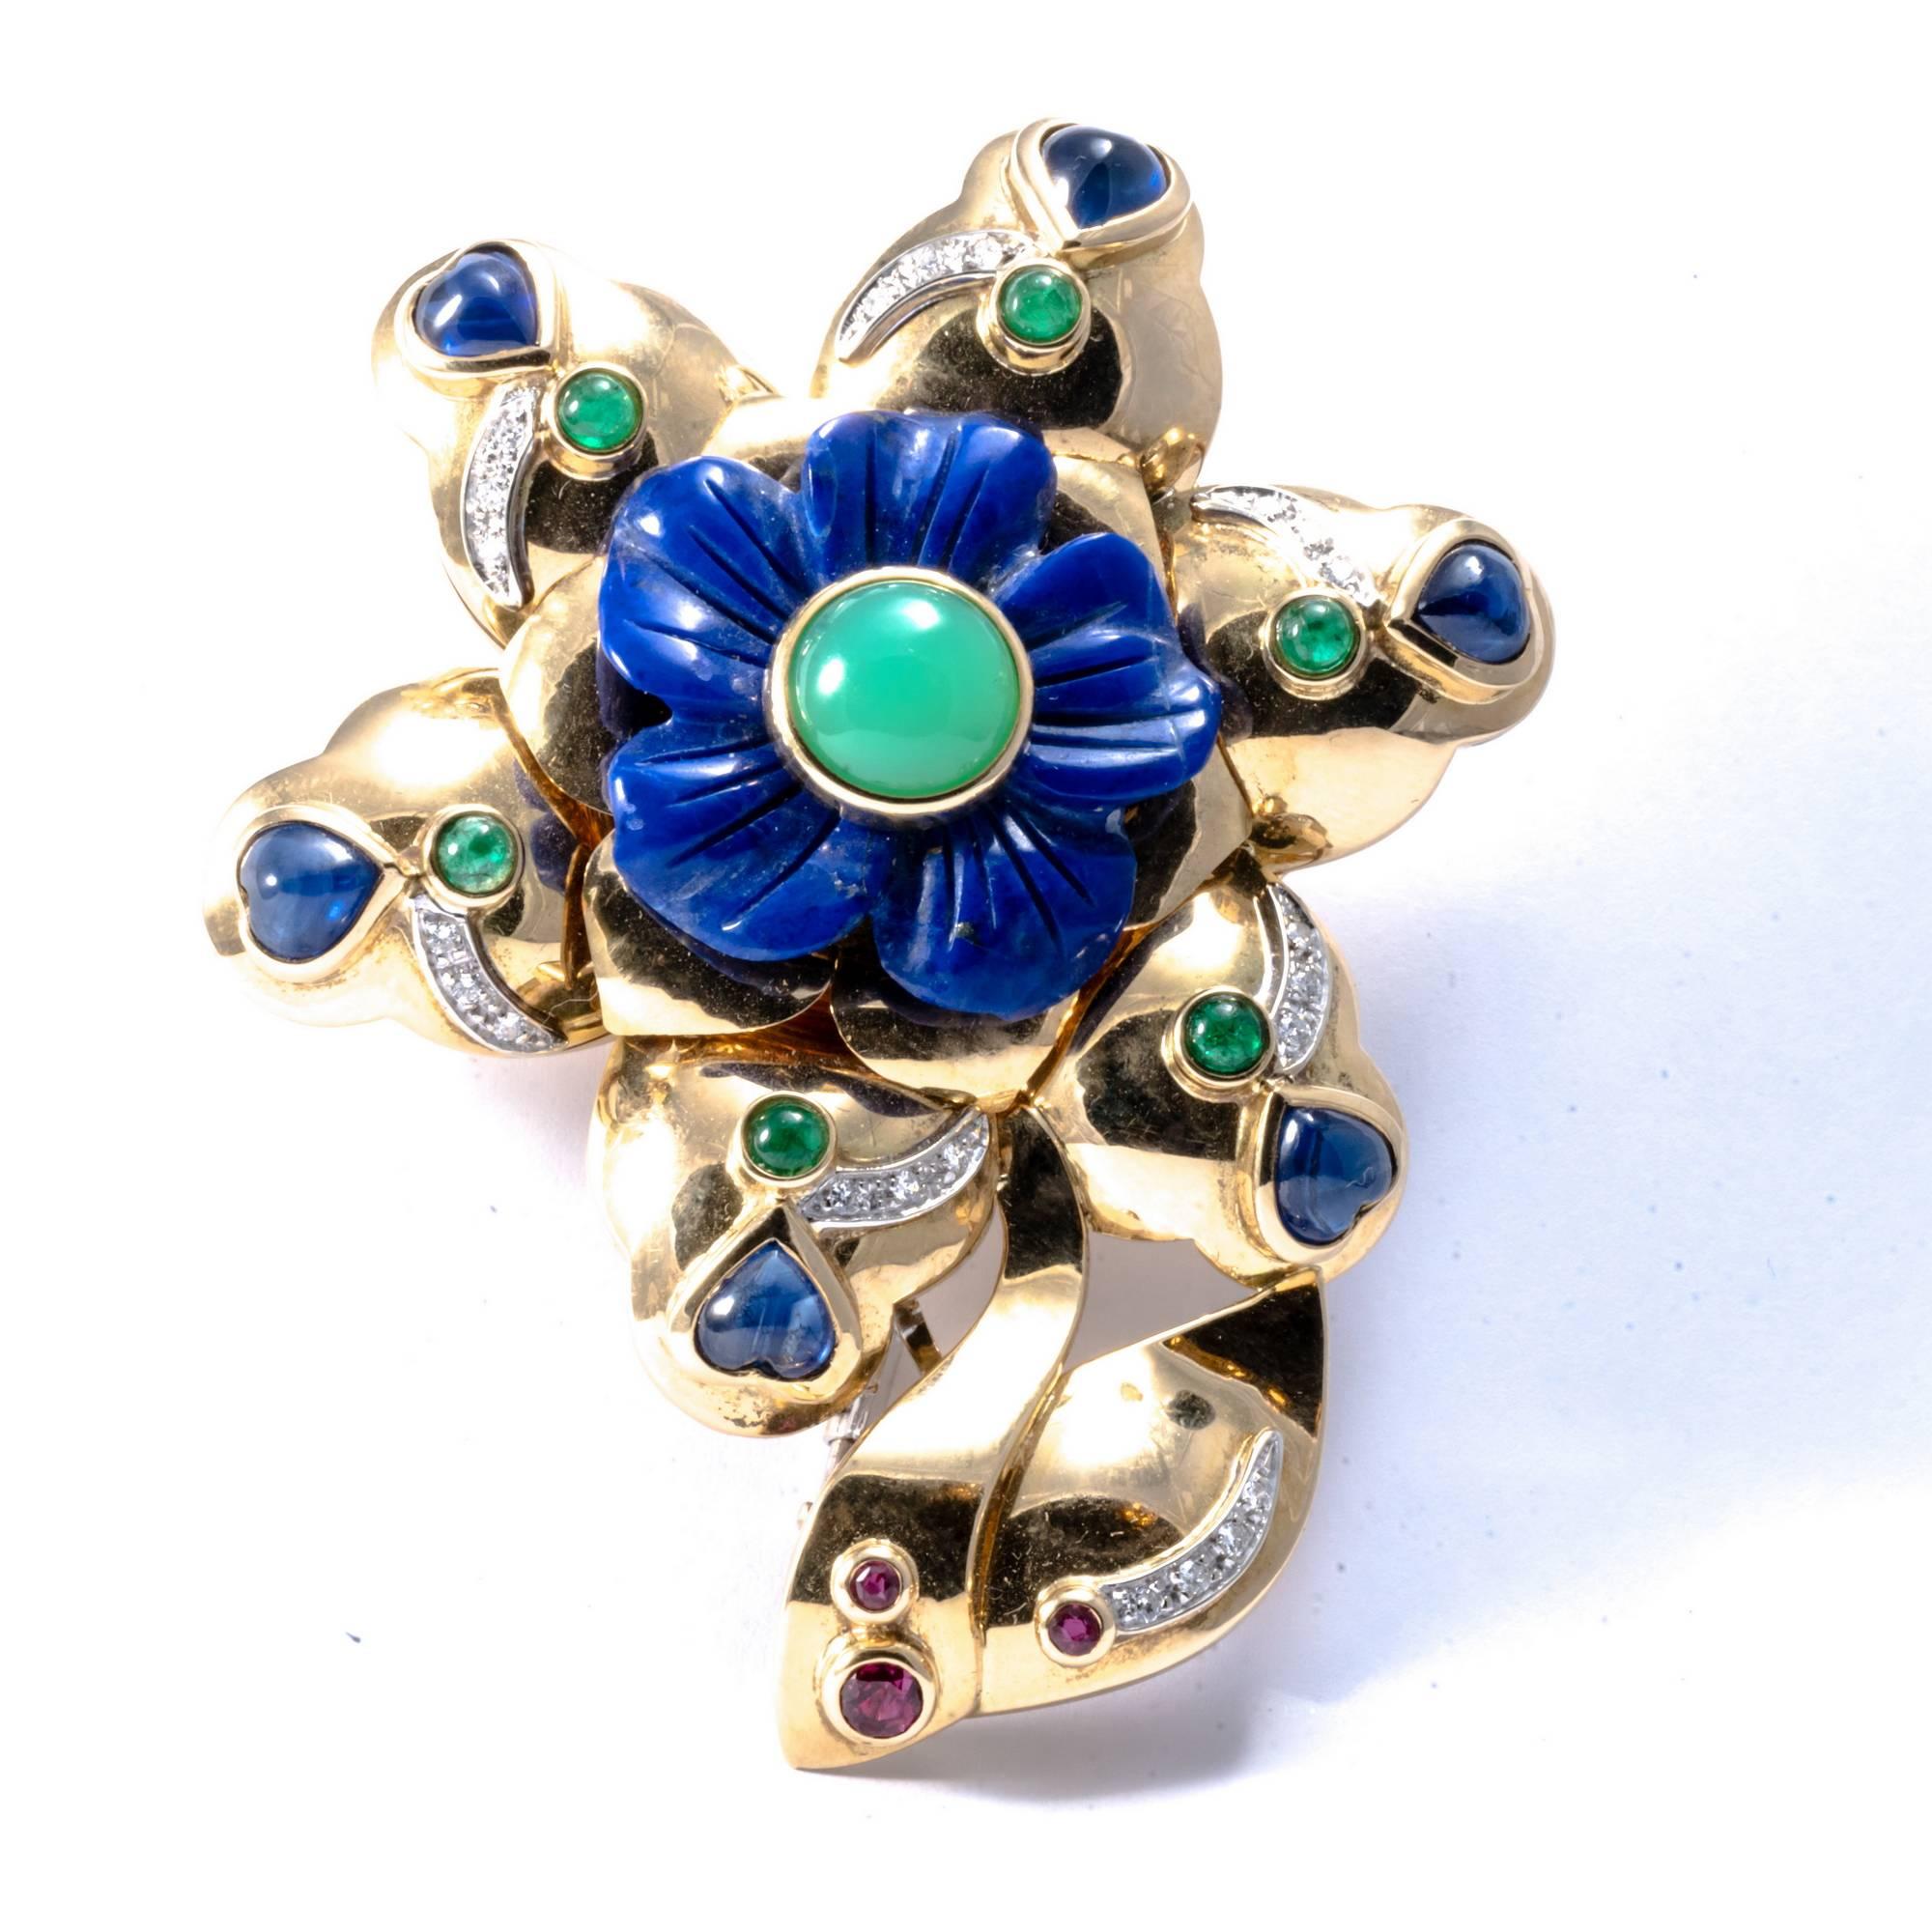 This original 1980 American pin brooch made in 18K yellow gold can be adapted to form a vivid, eye-catching necklace enhancer. It's gaudy design features strong, prominent shapes, enlightened by a variety of natural precious and semi-precious